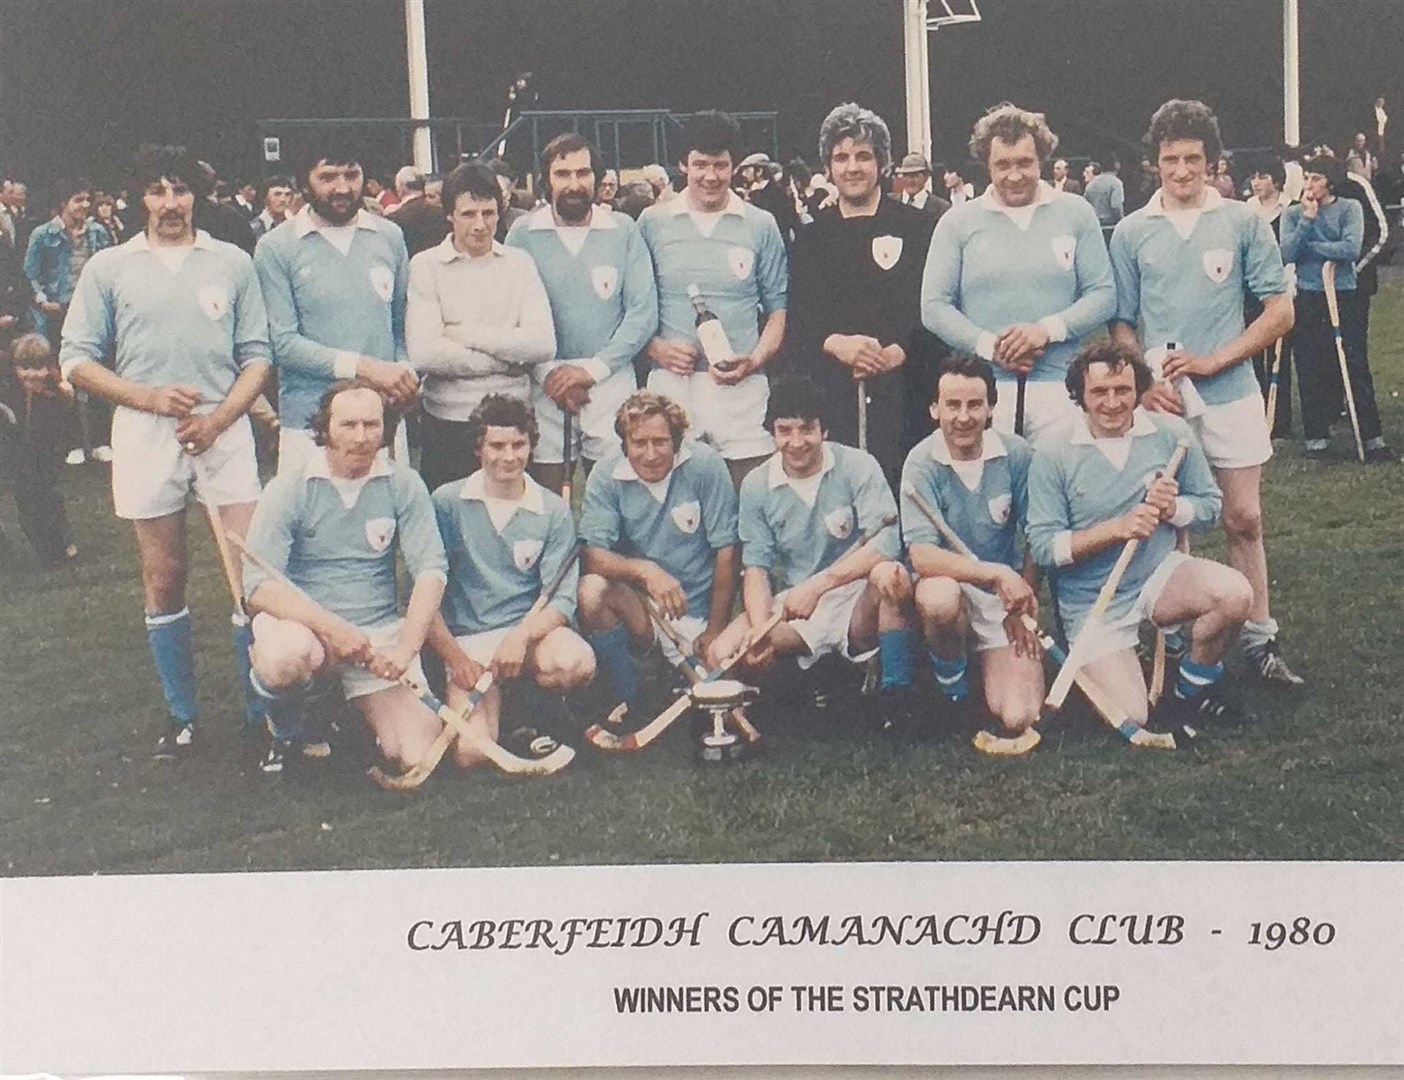 'Tumba' MacDonald (back row, far right) with Caberfeidh after winning the 1980 Strathdearn Cup